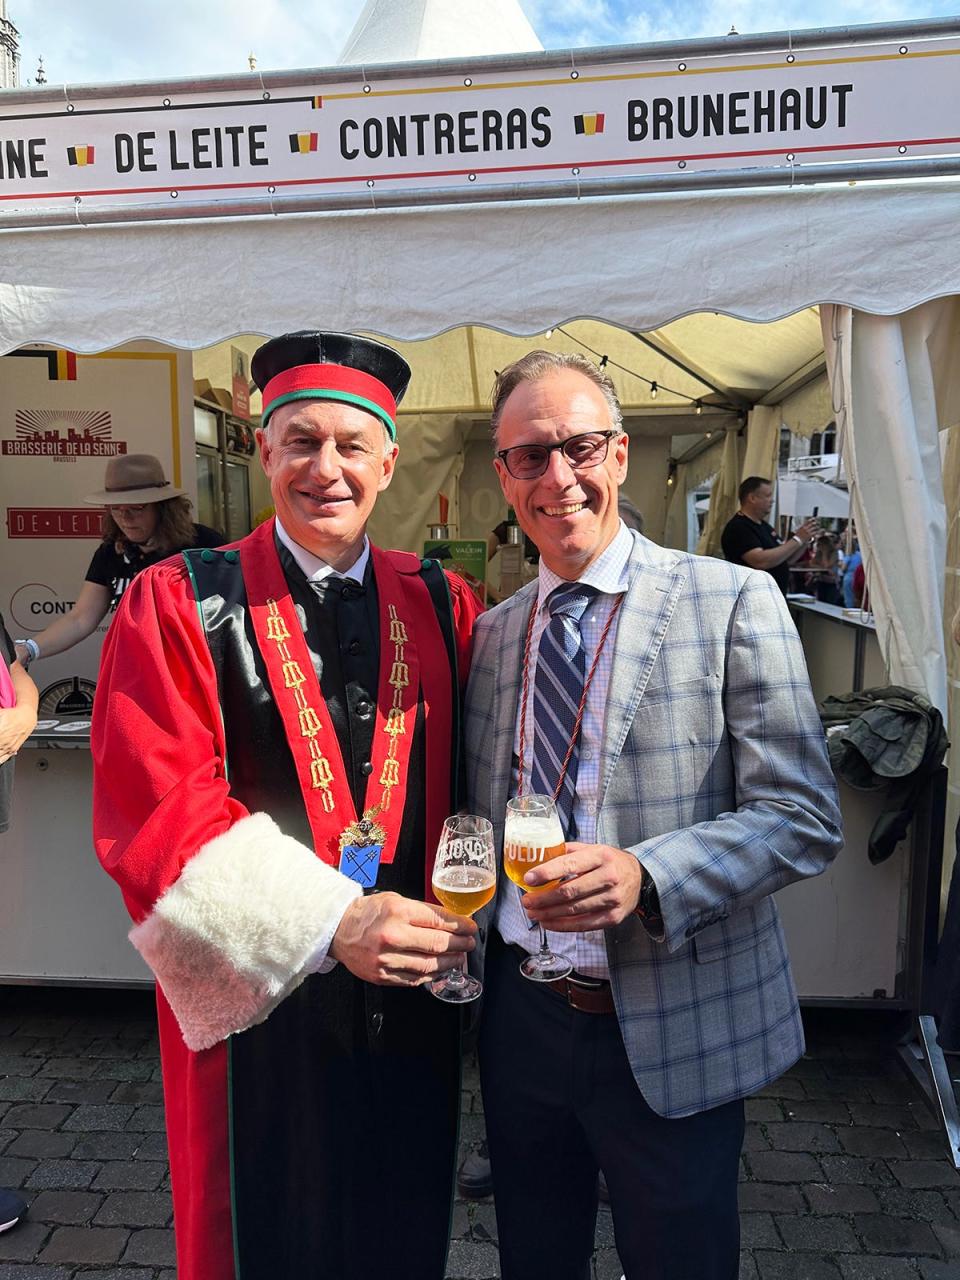 Jean-Francois Flechet received an honorary Knighthood of the Belgian Brewers Guild.